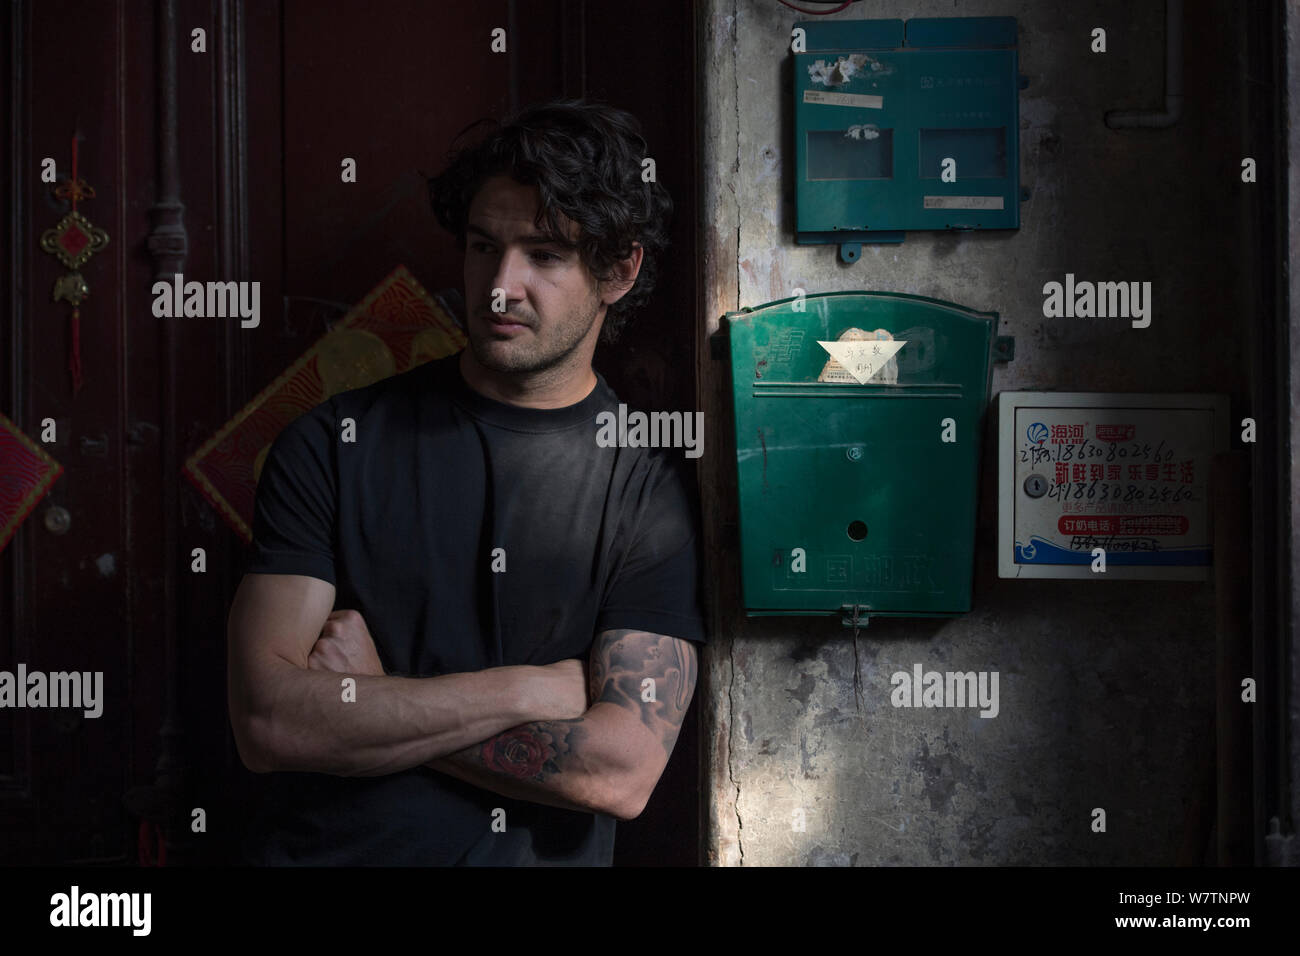 Brazilian soccer player Alexandre Pato, or just Pato, of Tianjin Quanjian F.C. poses for a portrait in Tianjin, China, 15 May 2017. Stock Photo